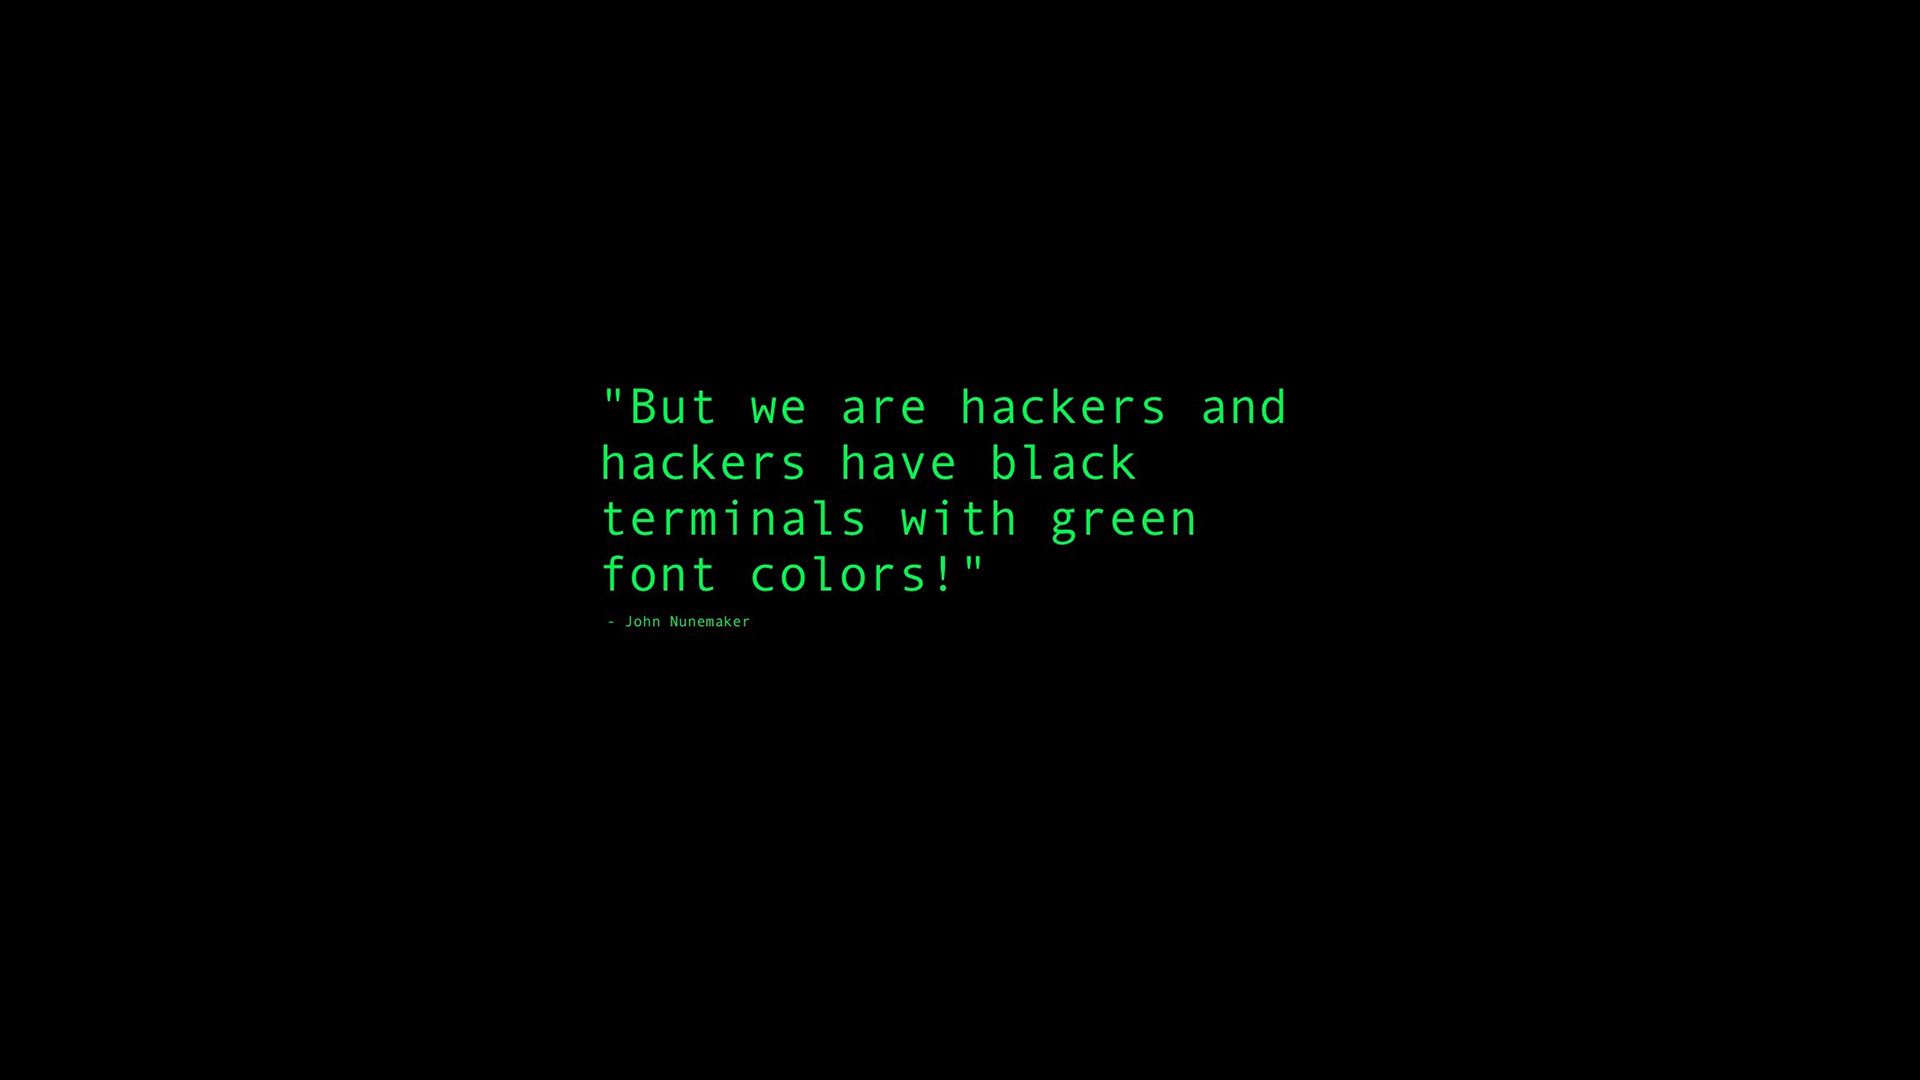 Black Terminals With Green Font Colors Quote 1366x768 Resolution HD 4k Wallpaper, Image, Background, Photo and Picture